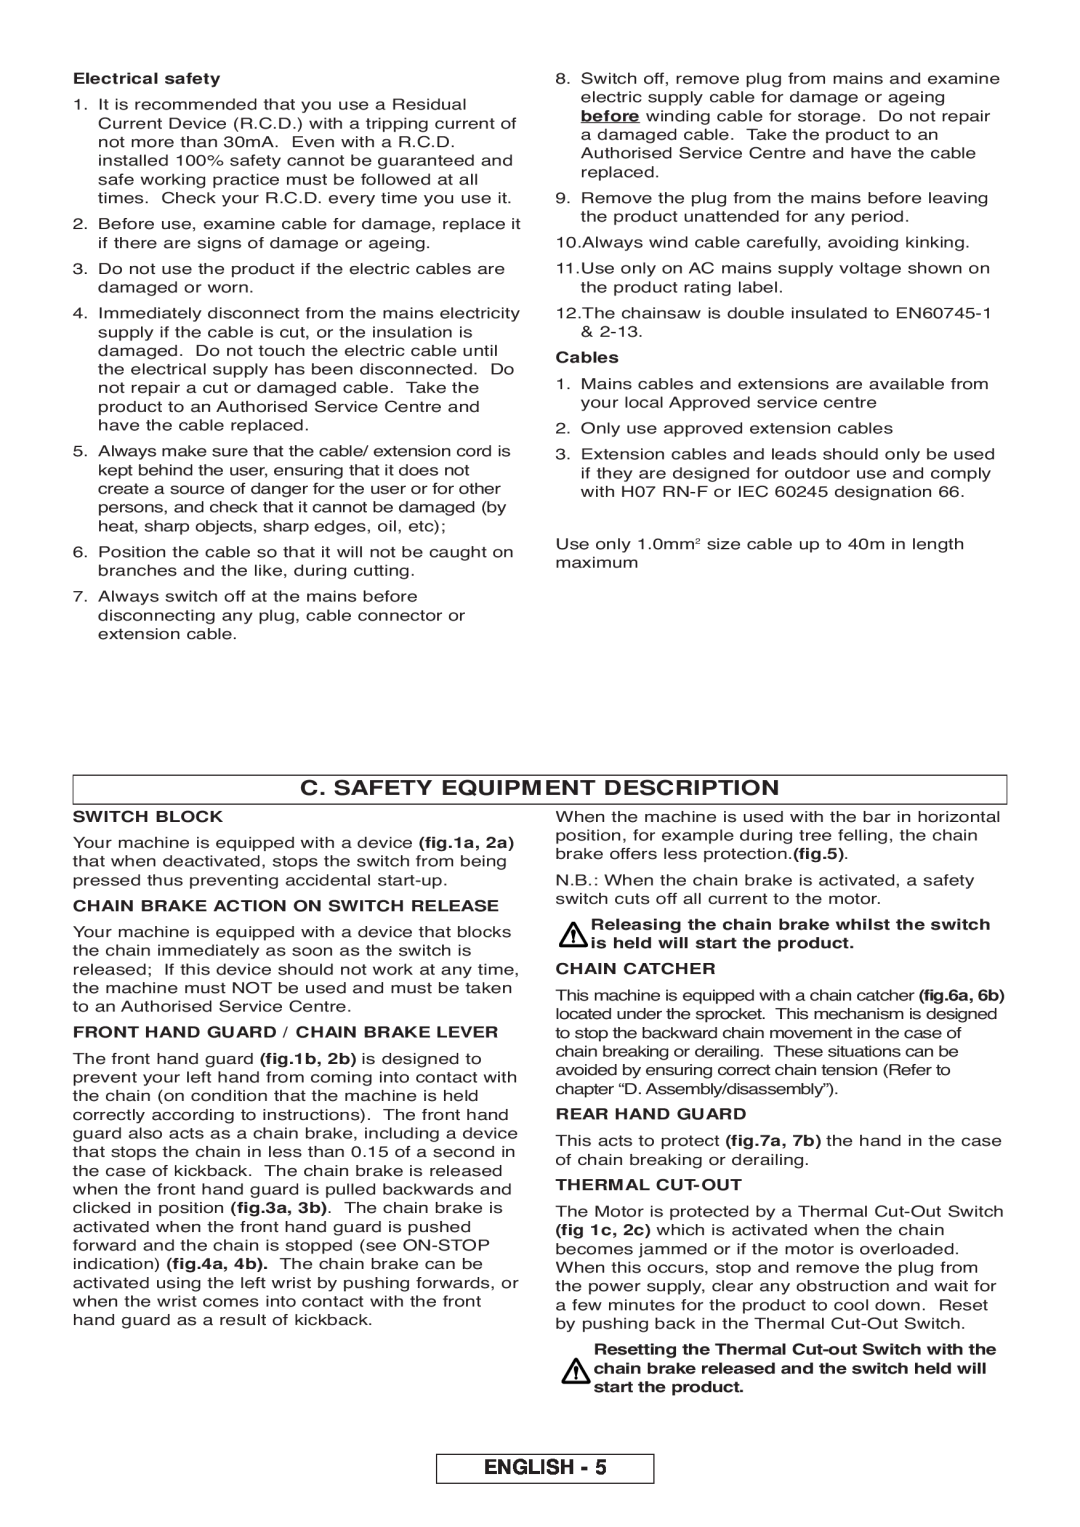 Gardena CSI4020-X manual C. Safety Equipment Description, English, Electrical safety, Cables, Switch Block, Chain Catcher 